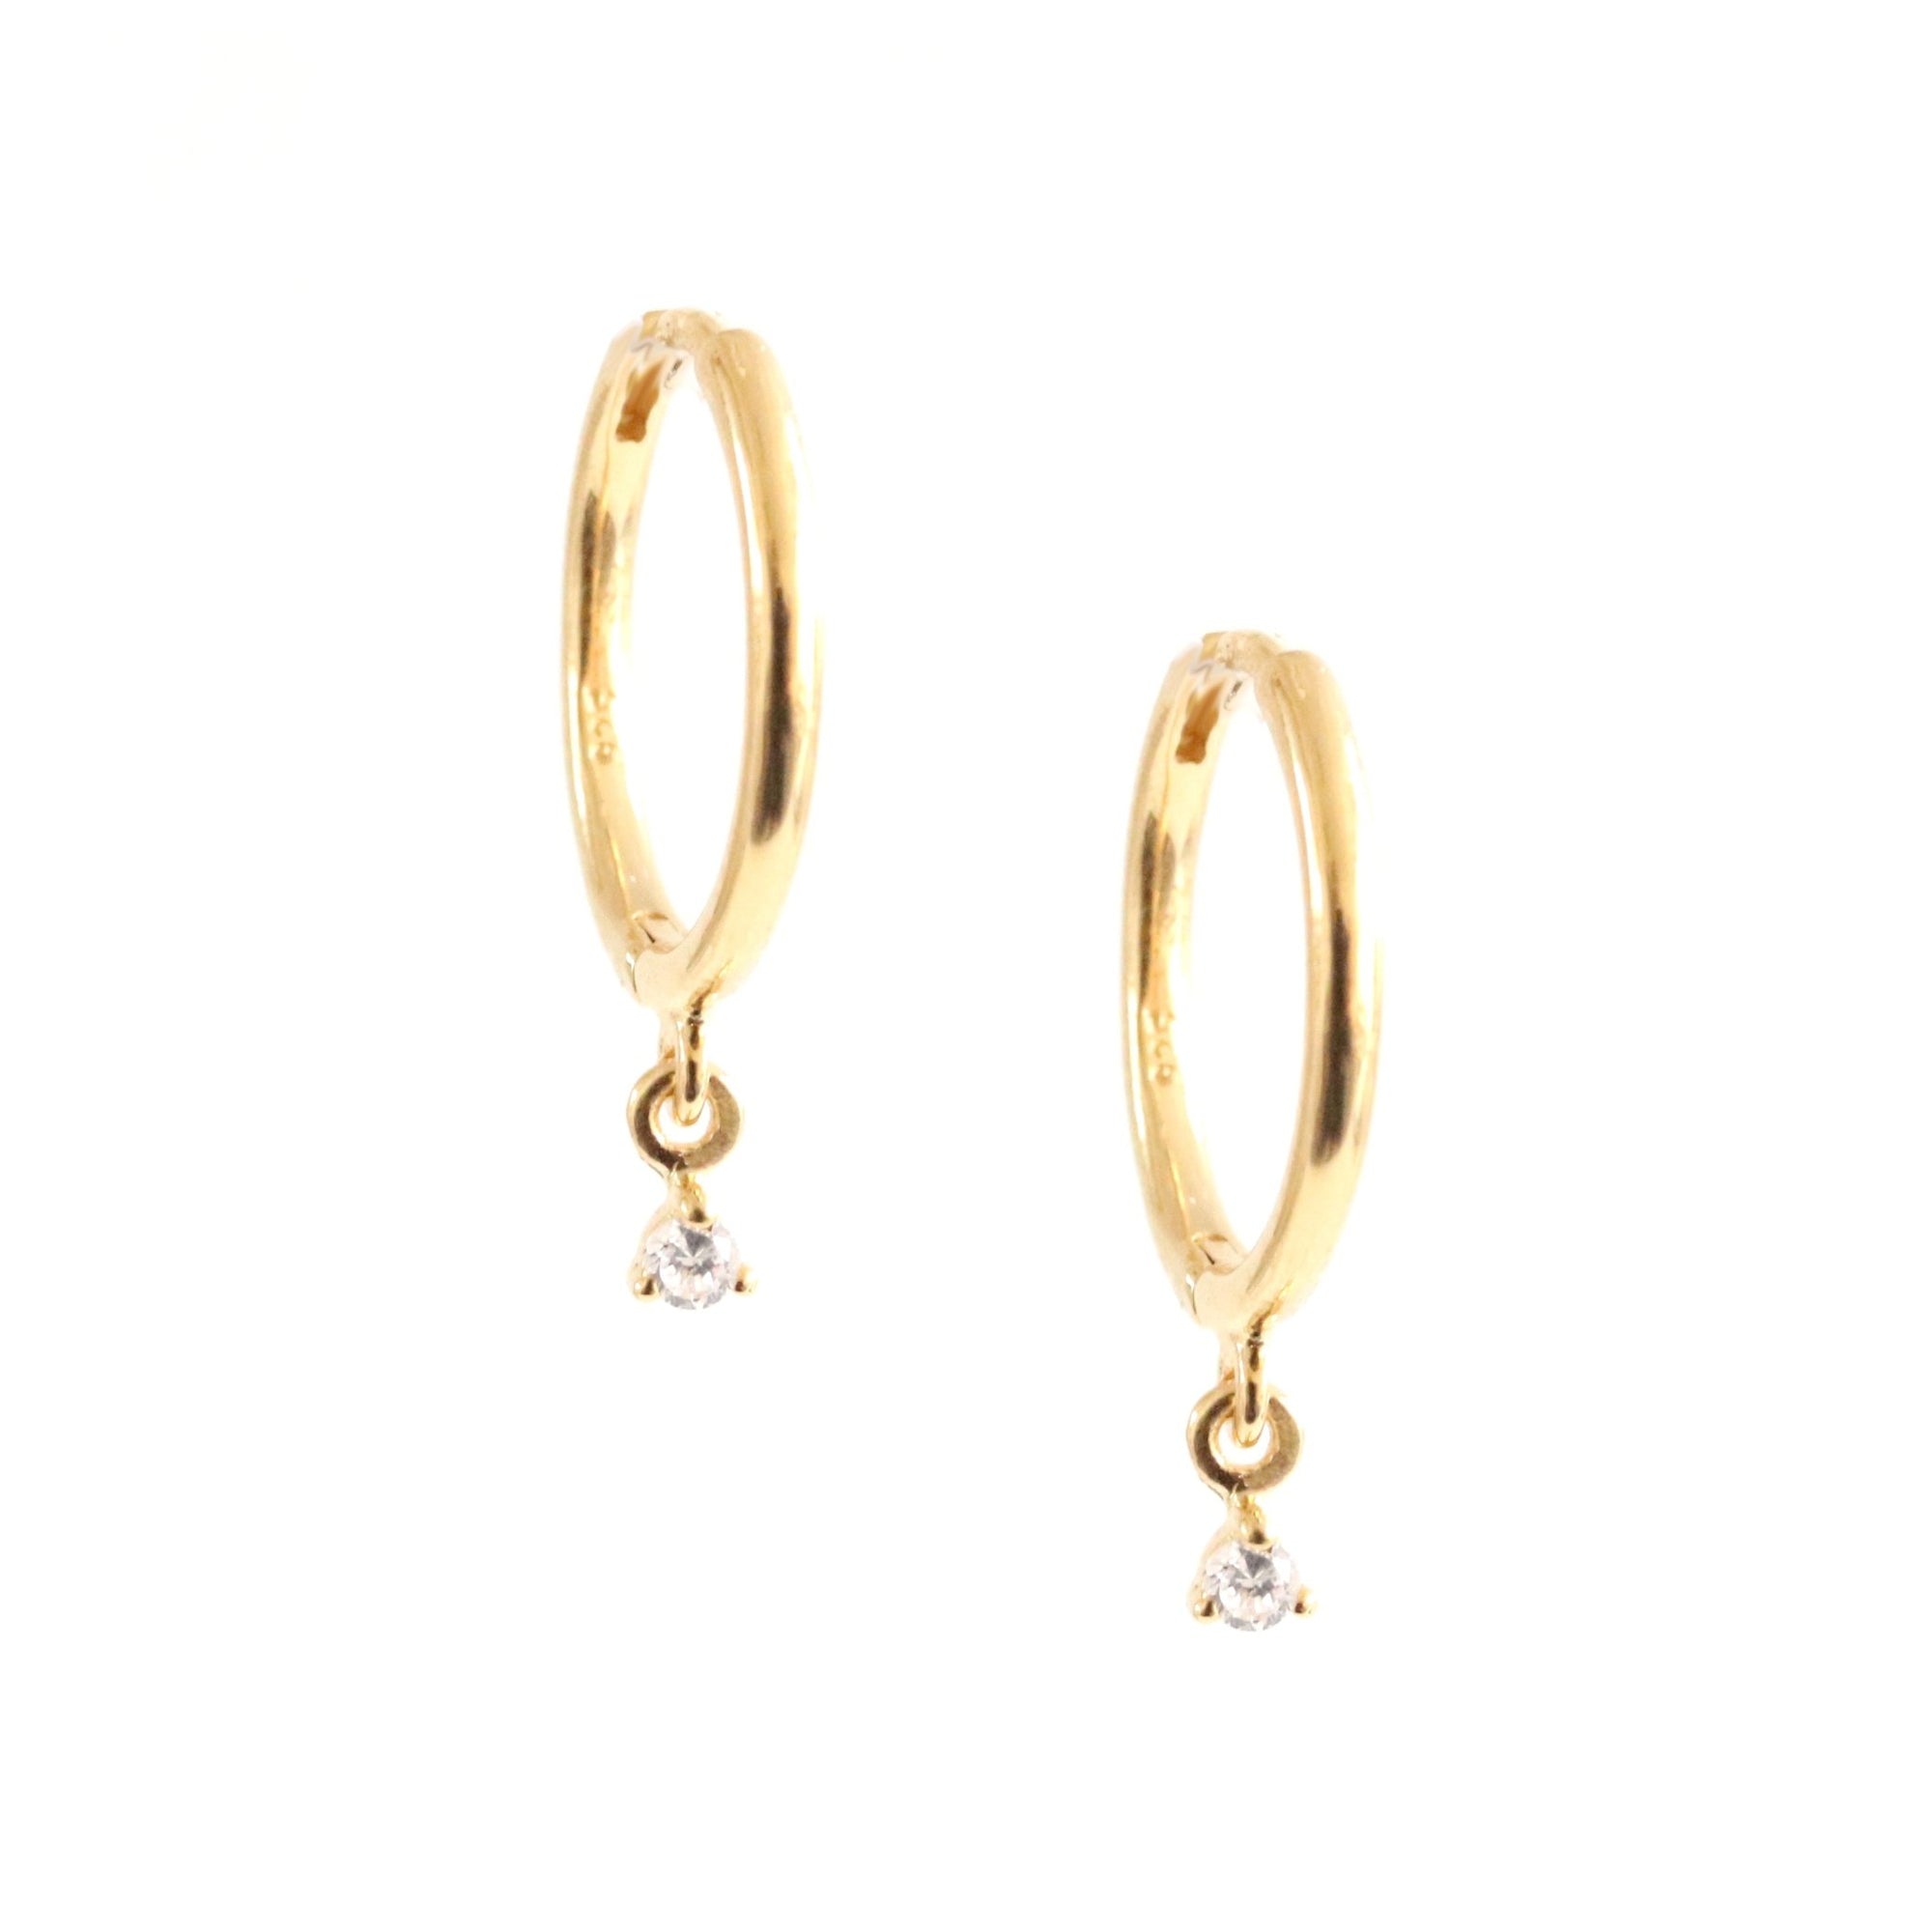 LOVE CHARM HUGGIE HOOPS - CUBIC ZIRCONIA & GOLD - SO PRETTY CARA COTTER